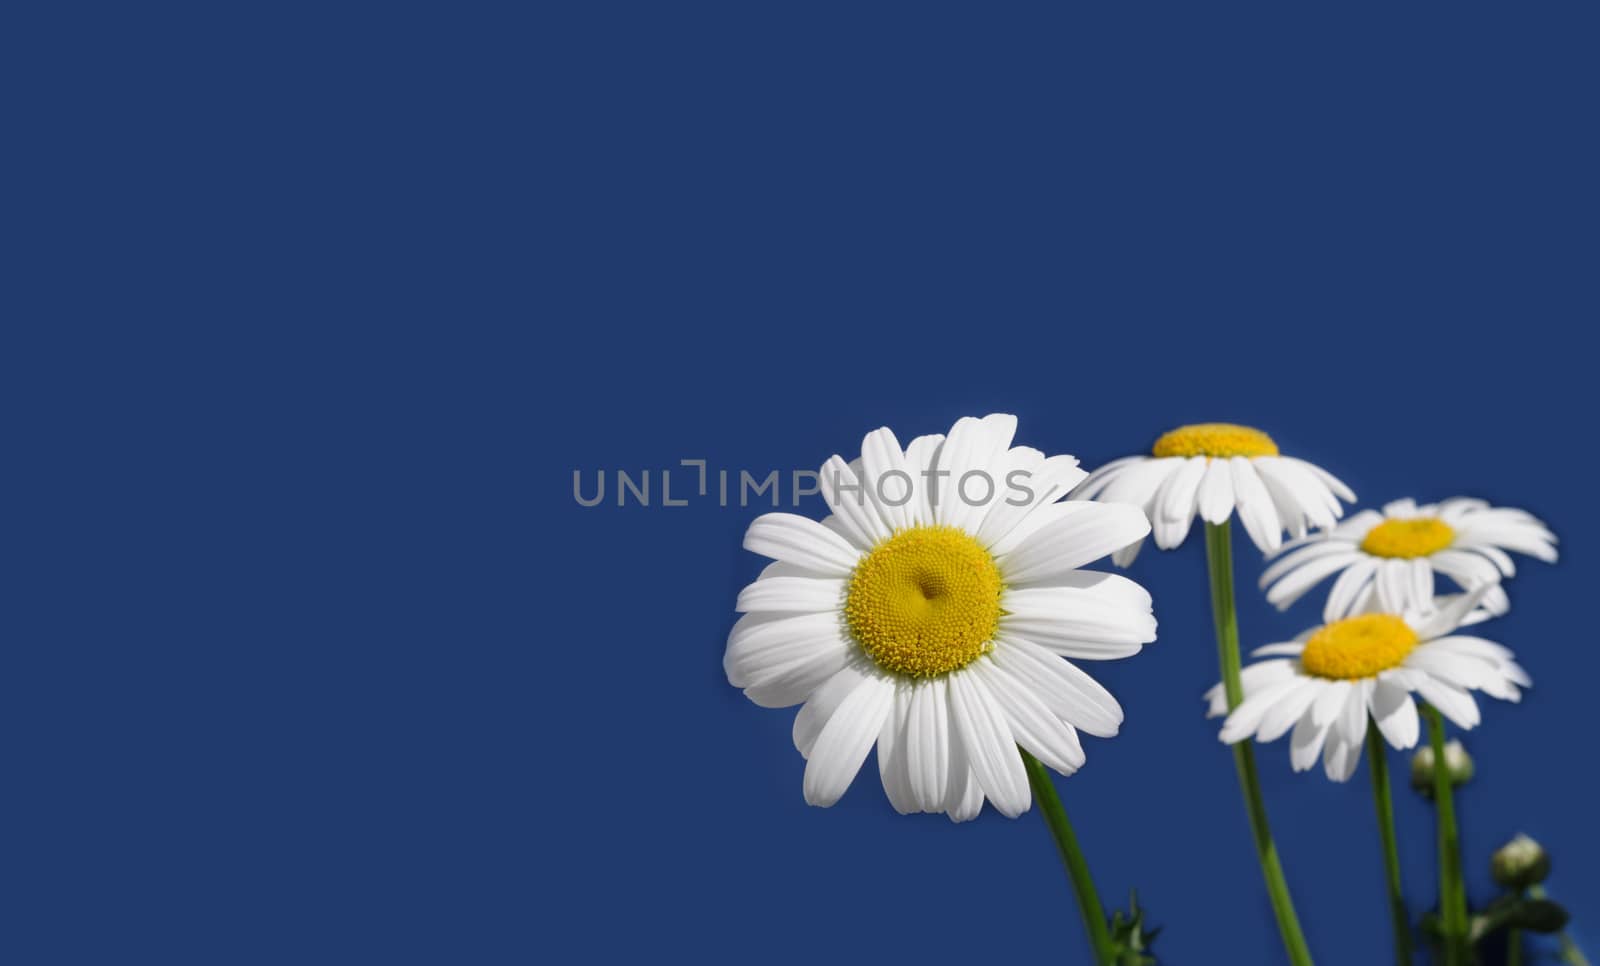 Greeting card with wild chamomile flowers isolated on blue background at right and free space for text at left